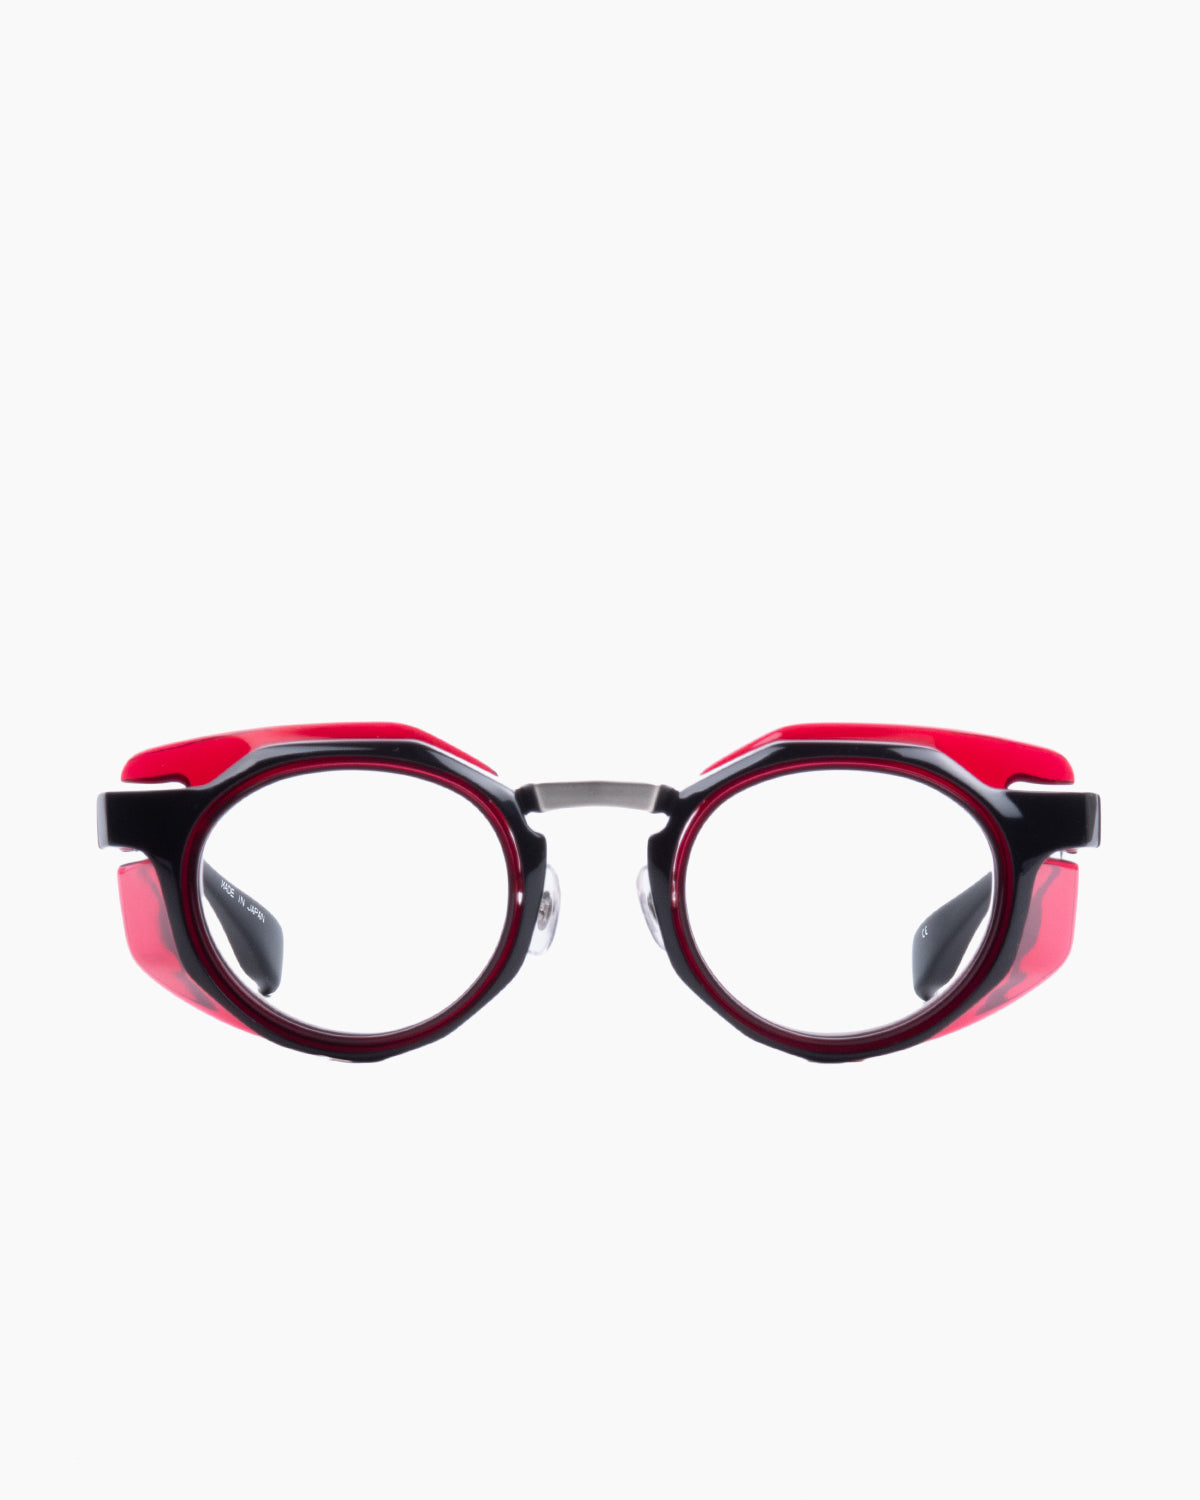 Factory 900 - RF056 - 001314 | glasses bar:  Marie-Sophie Dion